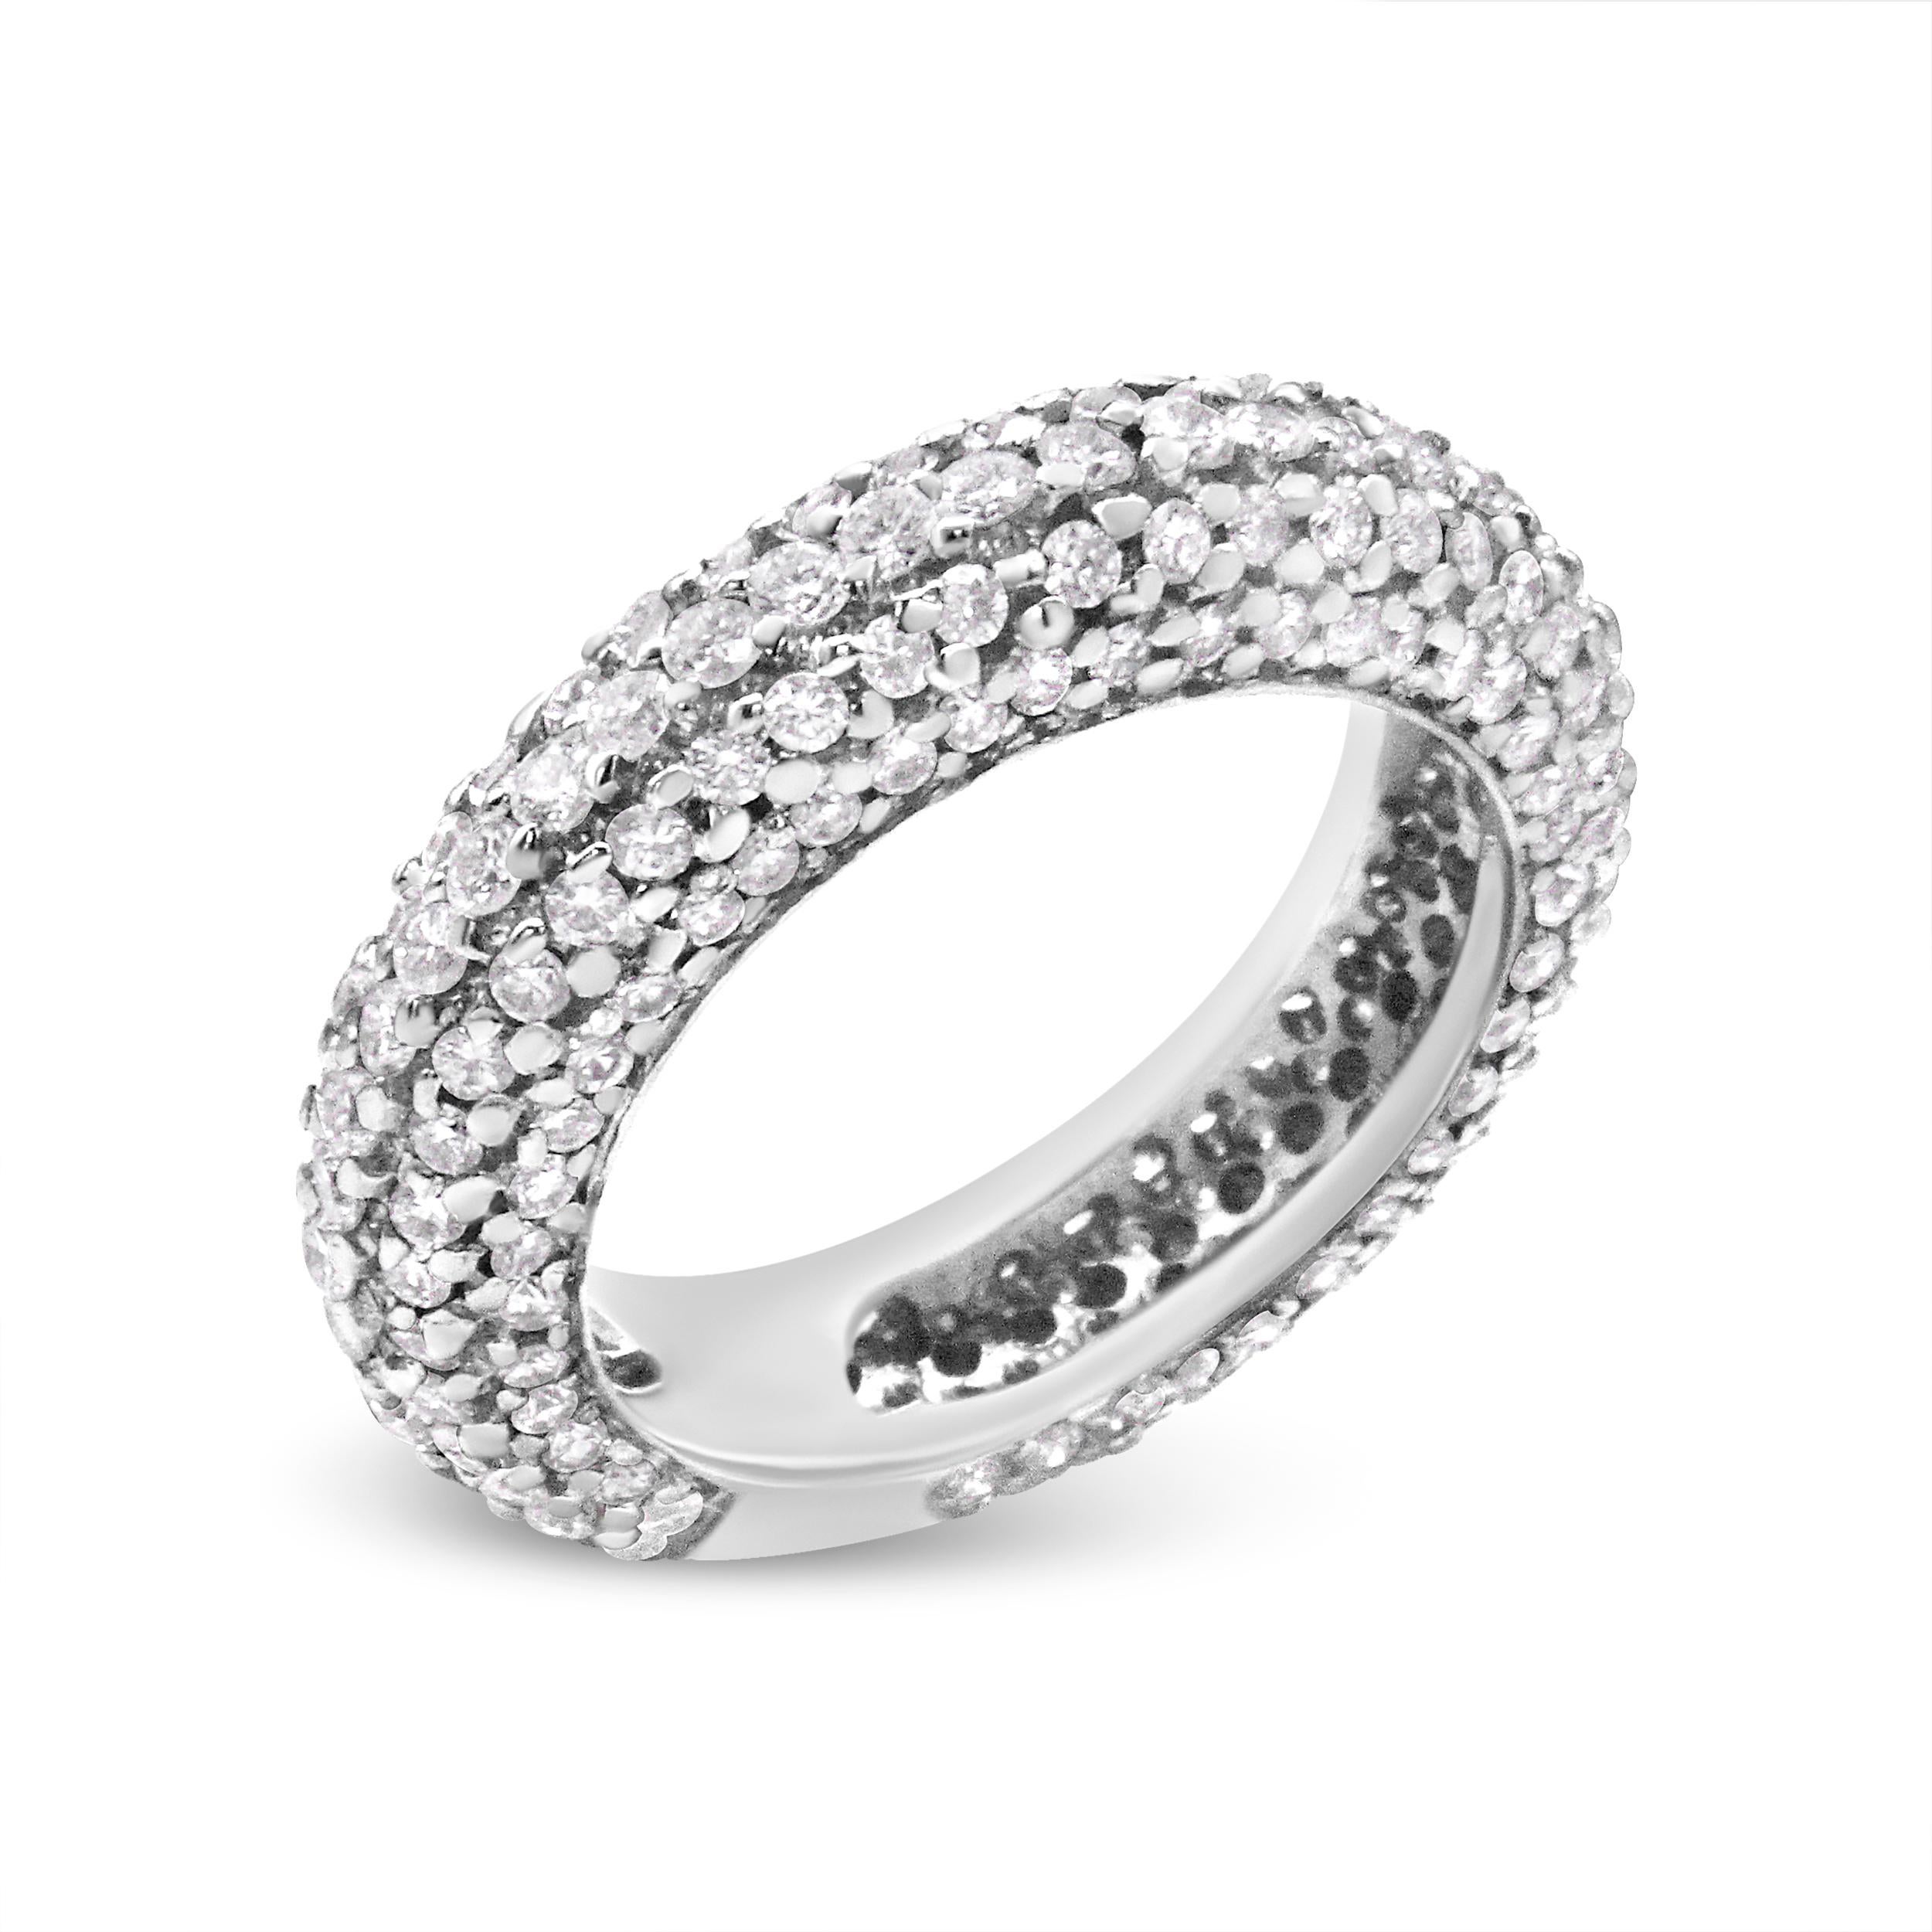 Contemporary 14K White Gold 2 1/2 Carat Round-Cut Diamond Cluster Band Ring